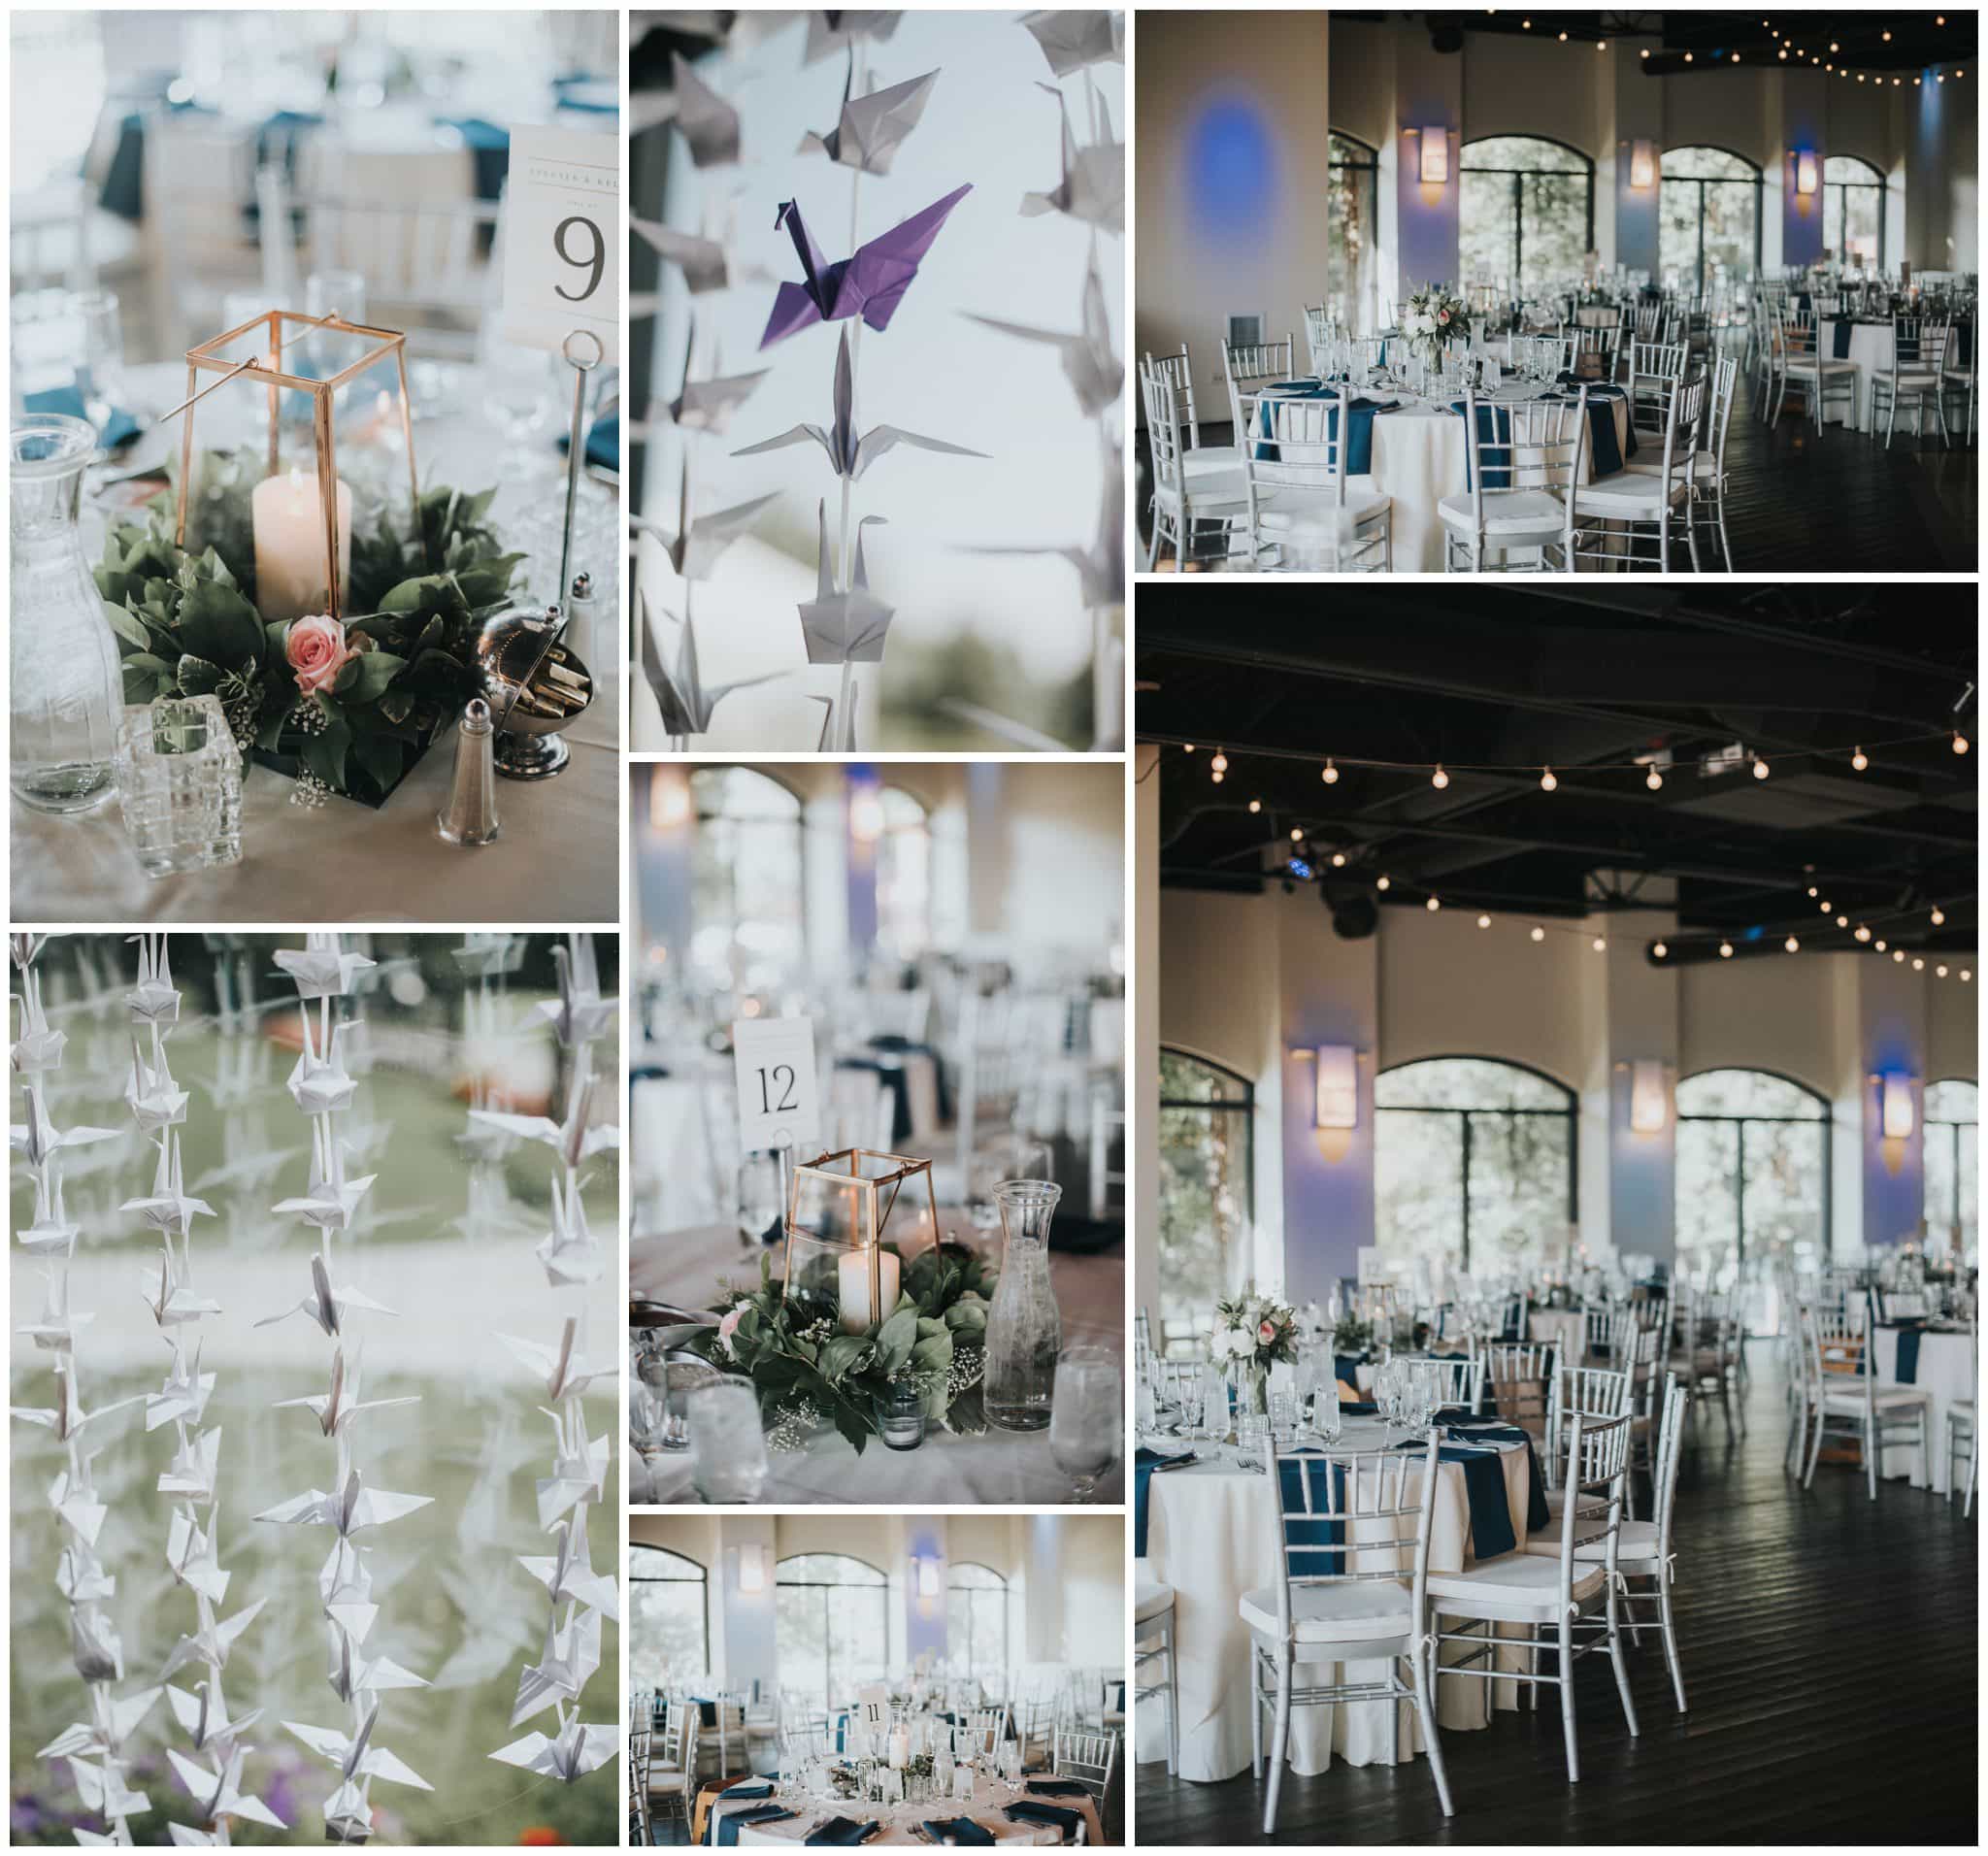 Kelsey and Spenser's Wellshire Golf Course Wedding was a gorgeous sunny day in Denver. A Wellshire Golf Course Wedding is great because they have a gorgeous glass room called the Mountain View Pavilion  that you can either use for your ceremony or reception. The light in there is so perfect!